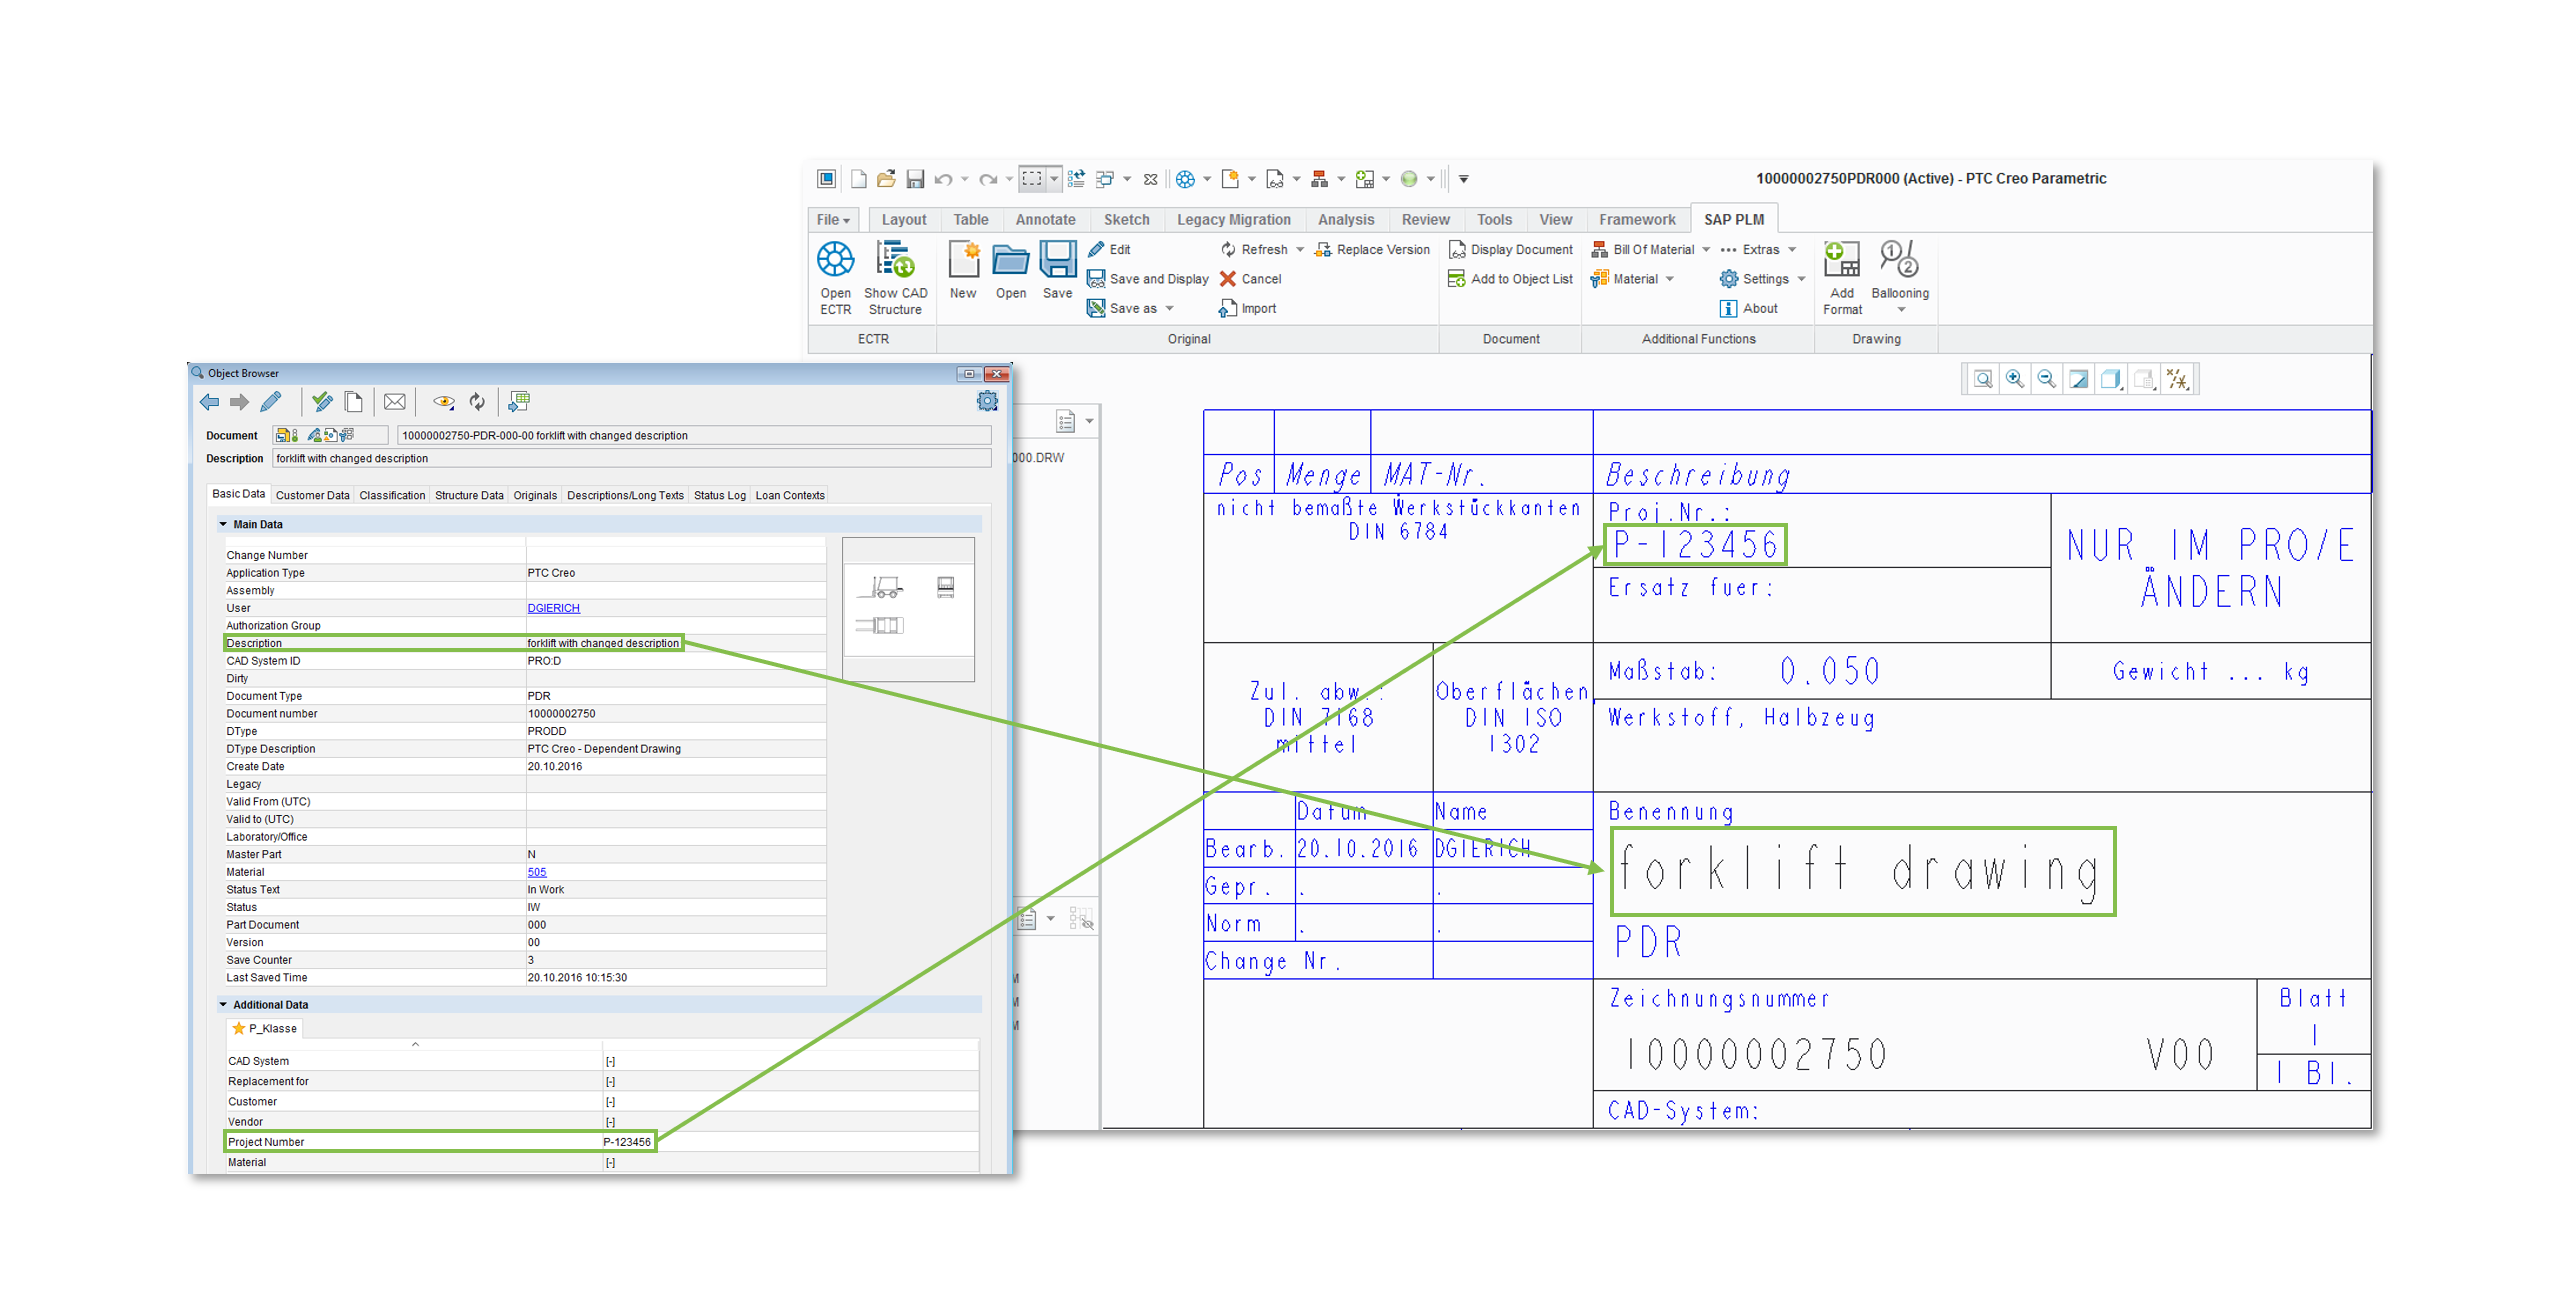 Screenshot of the synchronization of updated metadata into the drawing